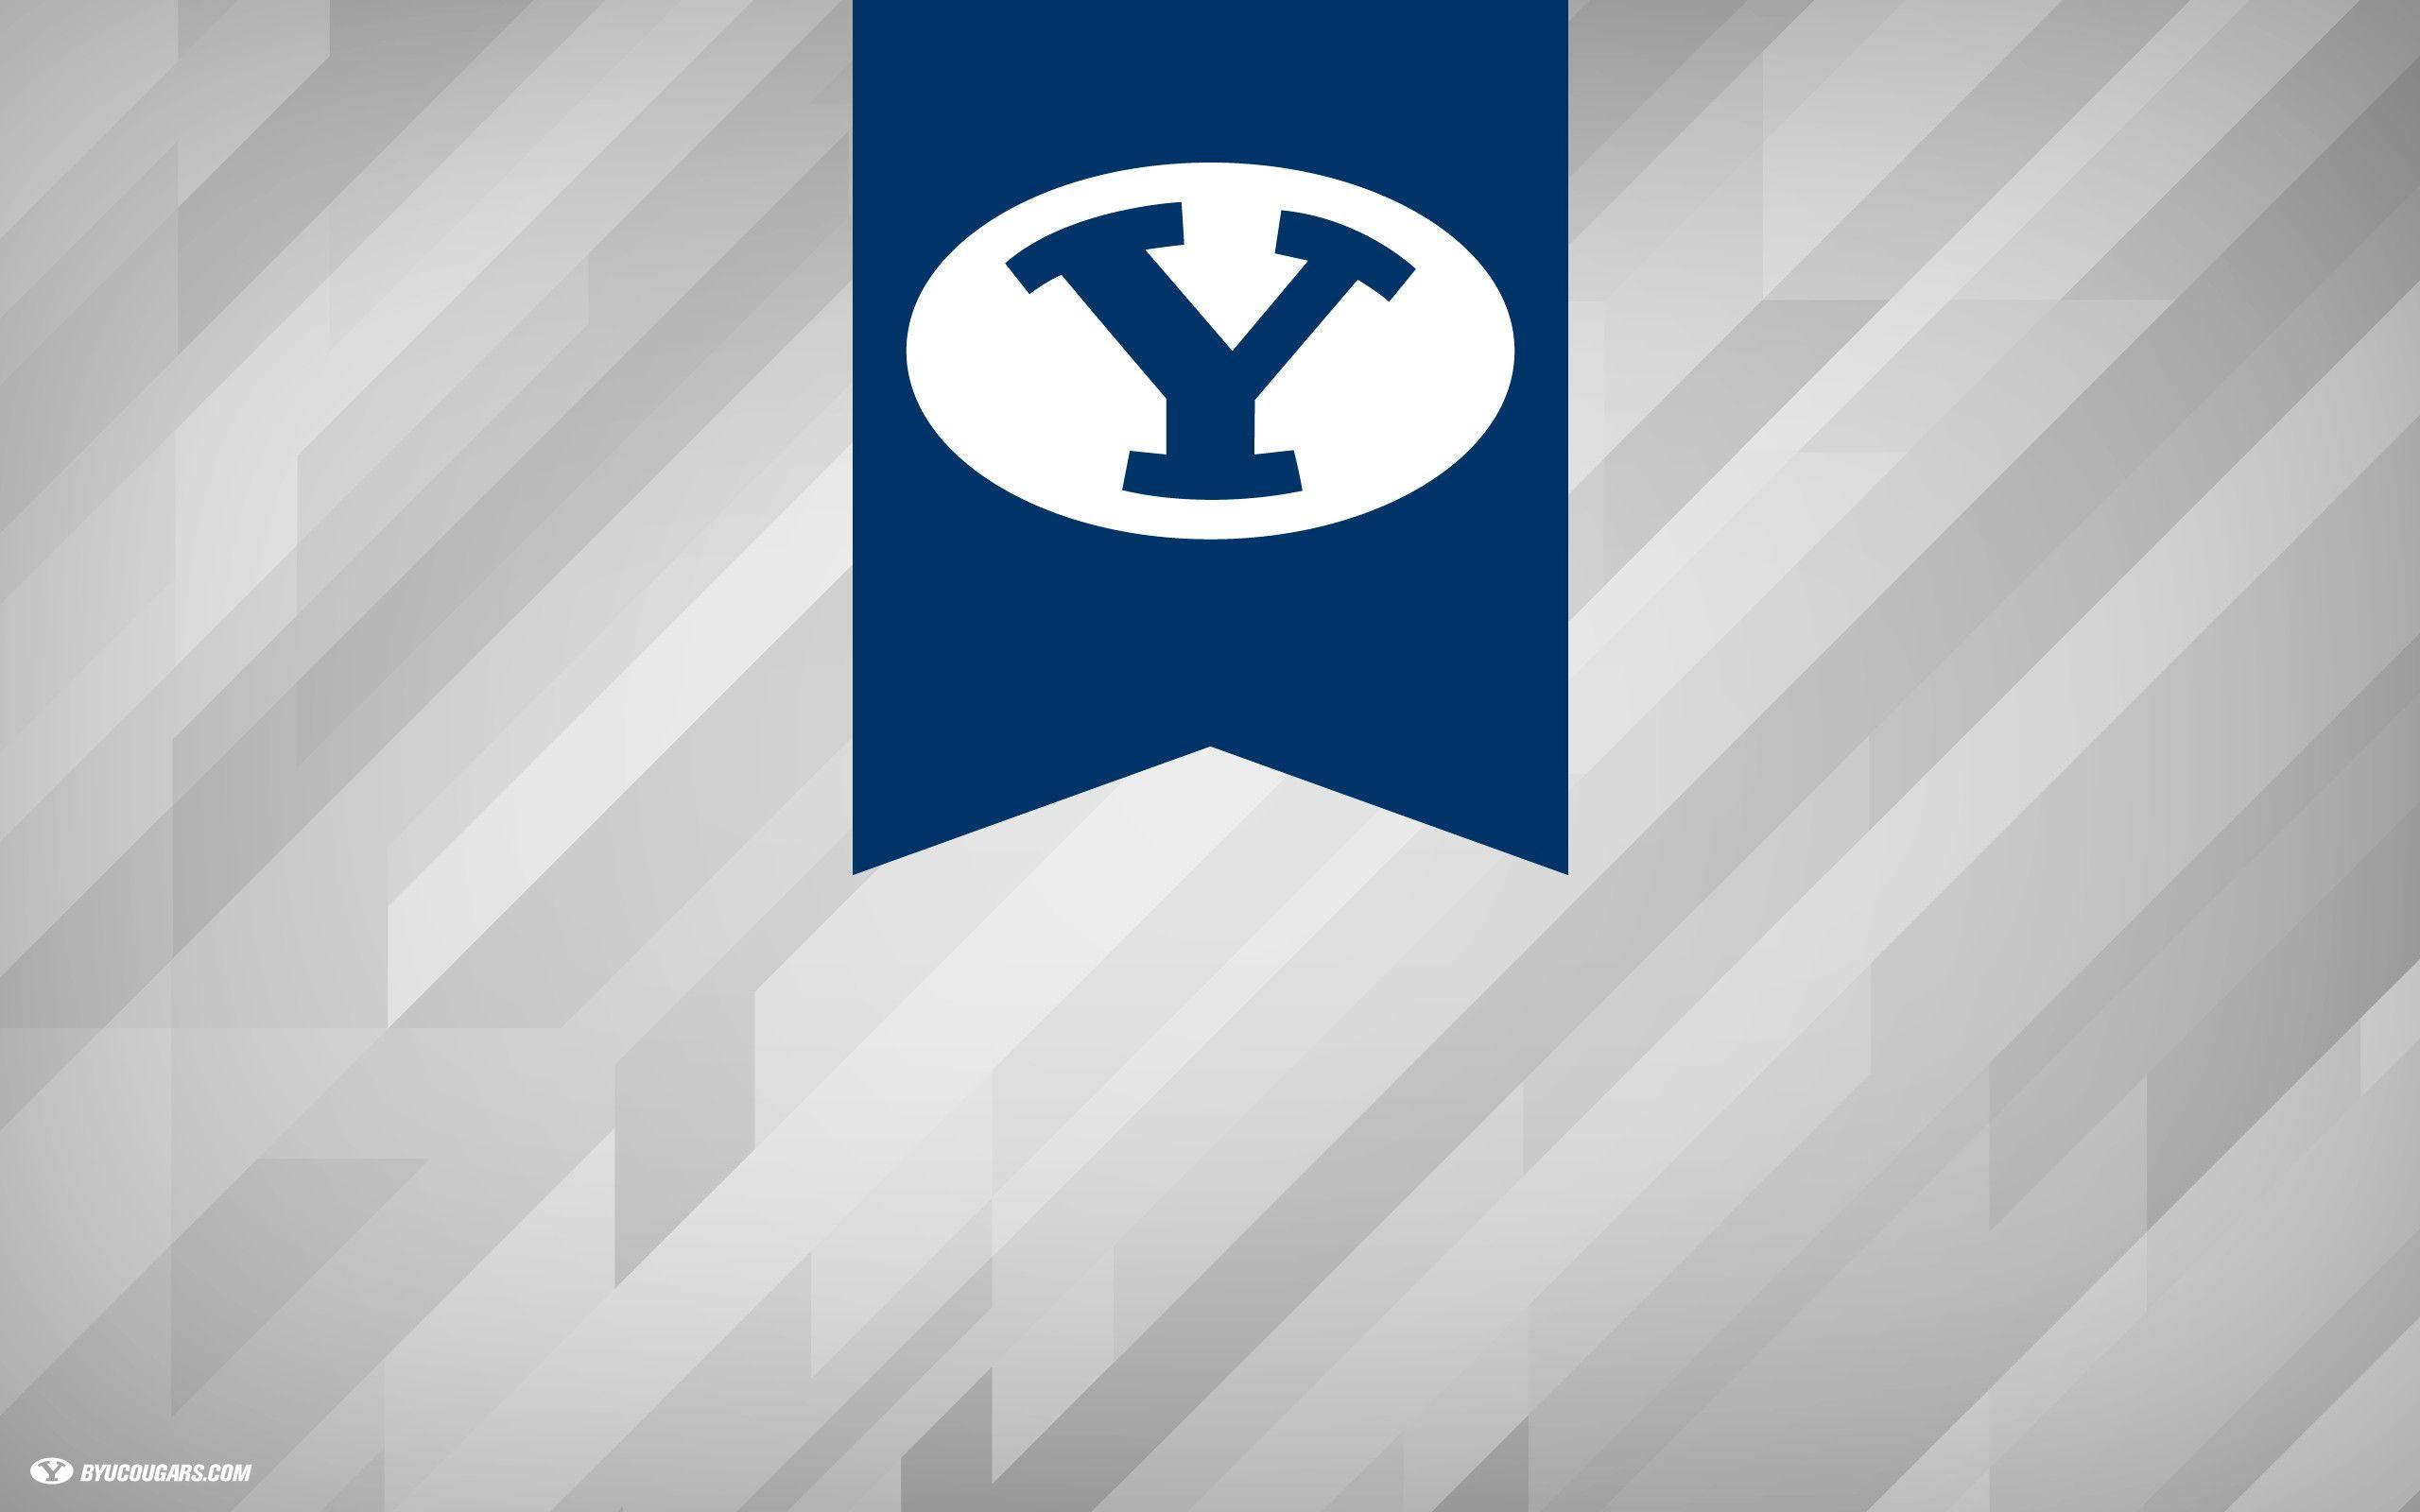 byu cougars logo on football field 1080p